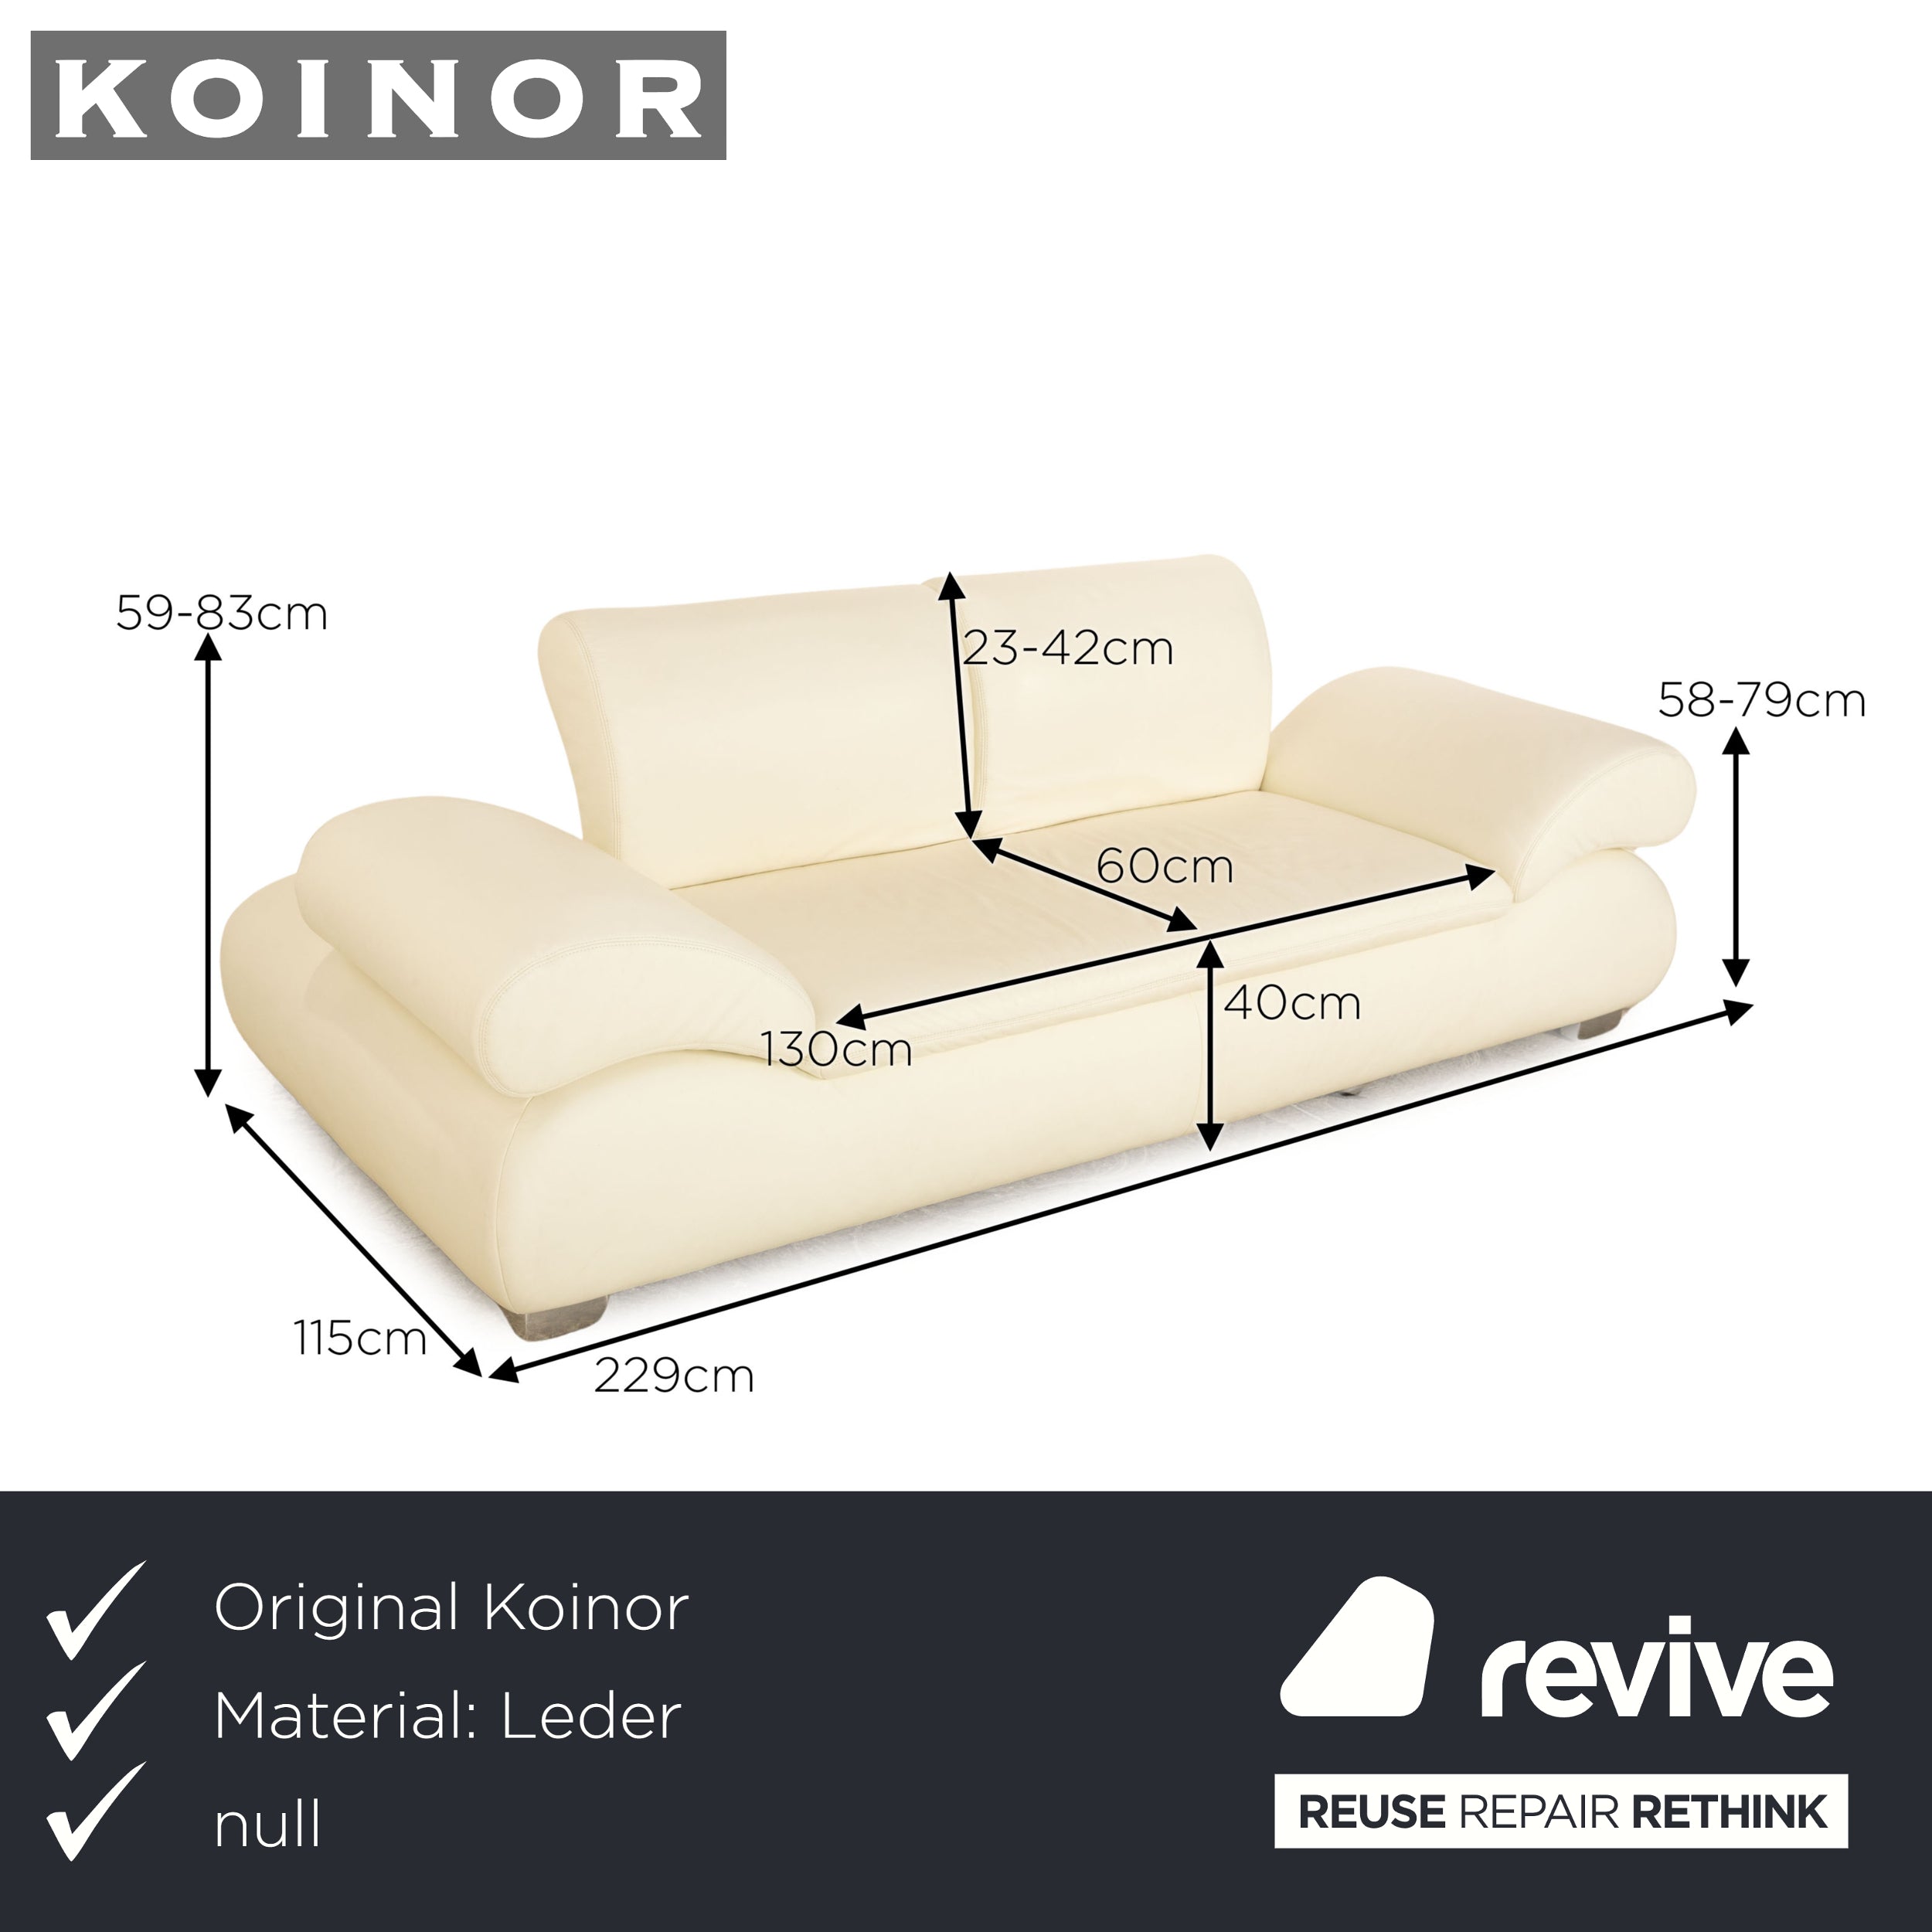 Koinor Diva Sofa Leather White Cream Two Seater Manual Function Couch